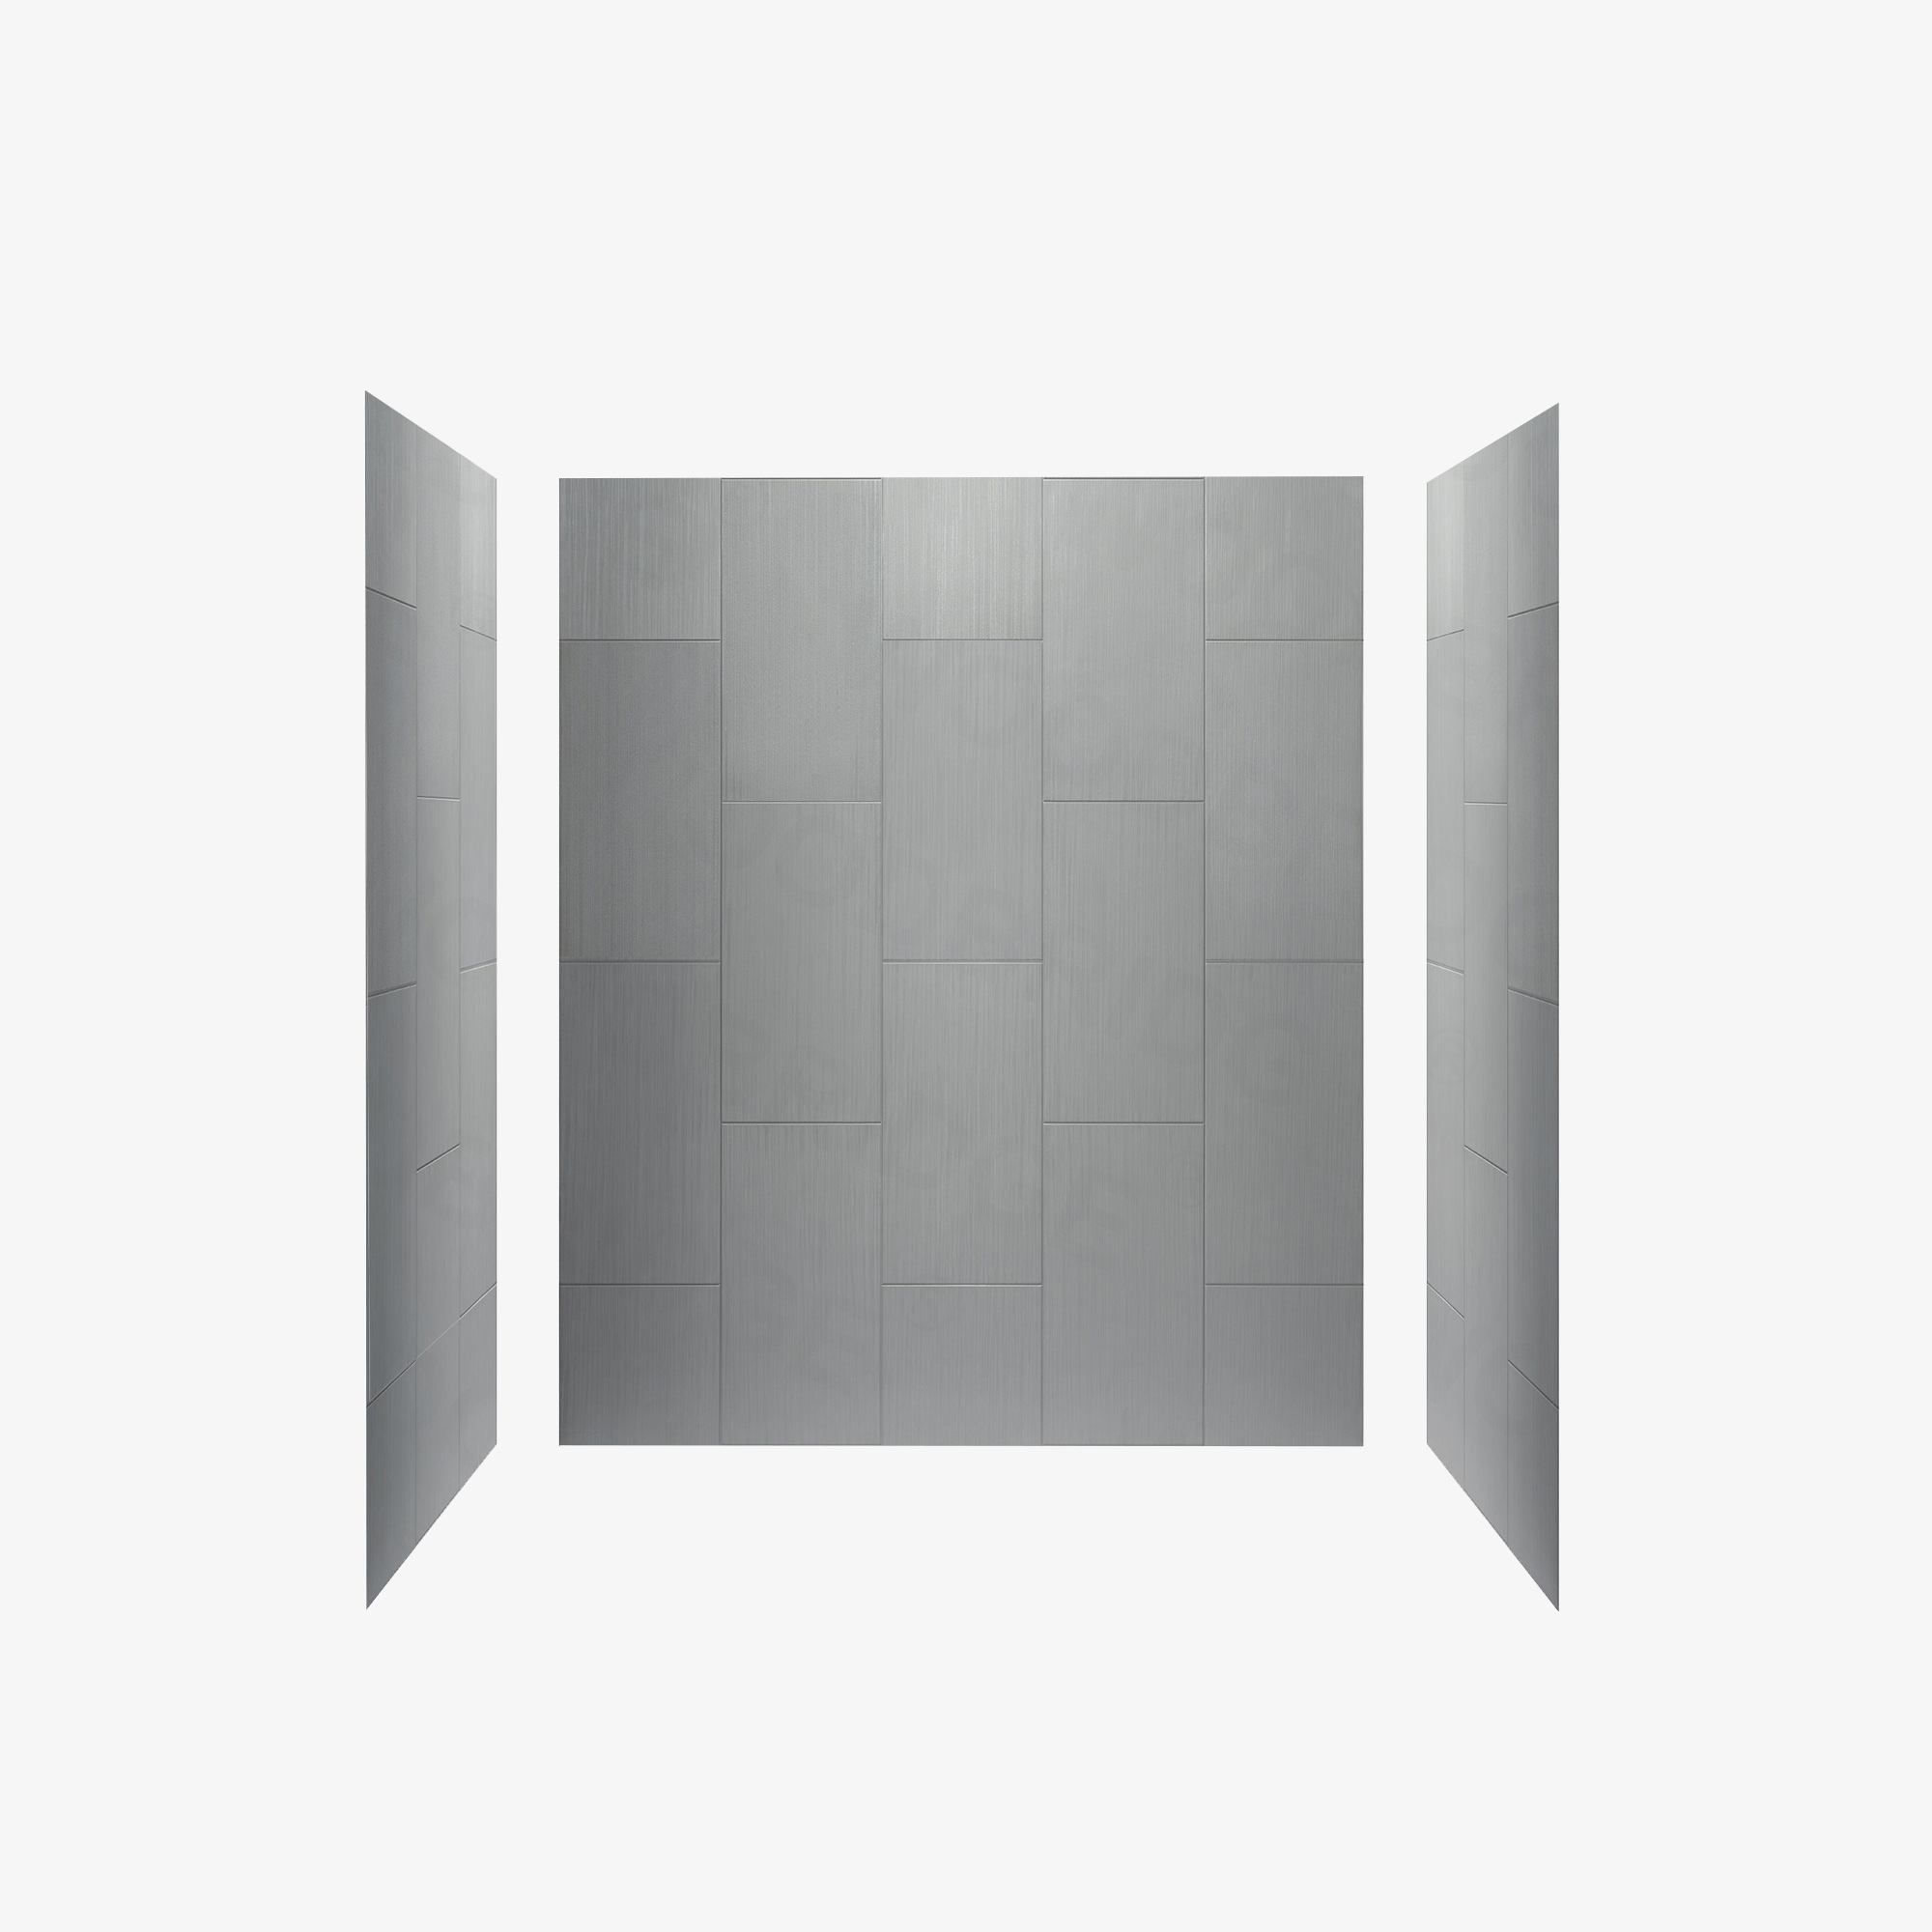 WOODBRIDGE Solid Surface 3-Panel Shower Wall Kit, 36-in L x 60-in W x 75-in H, Stacked Block in a Staggered Vertical Pattern. Matte Grey Finish